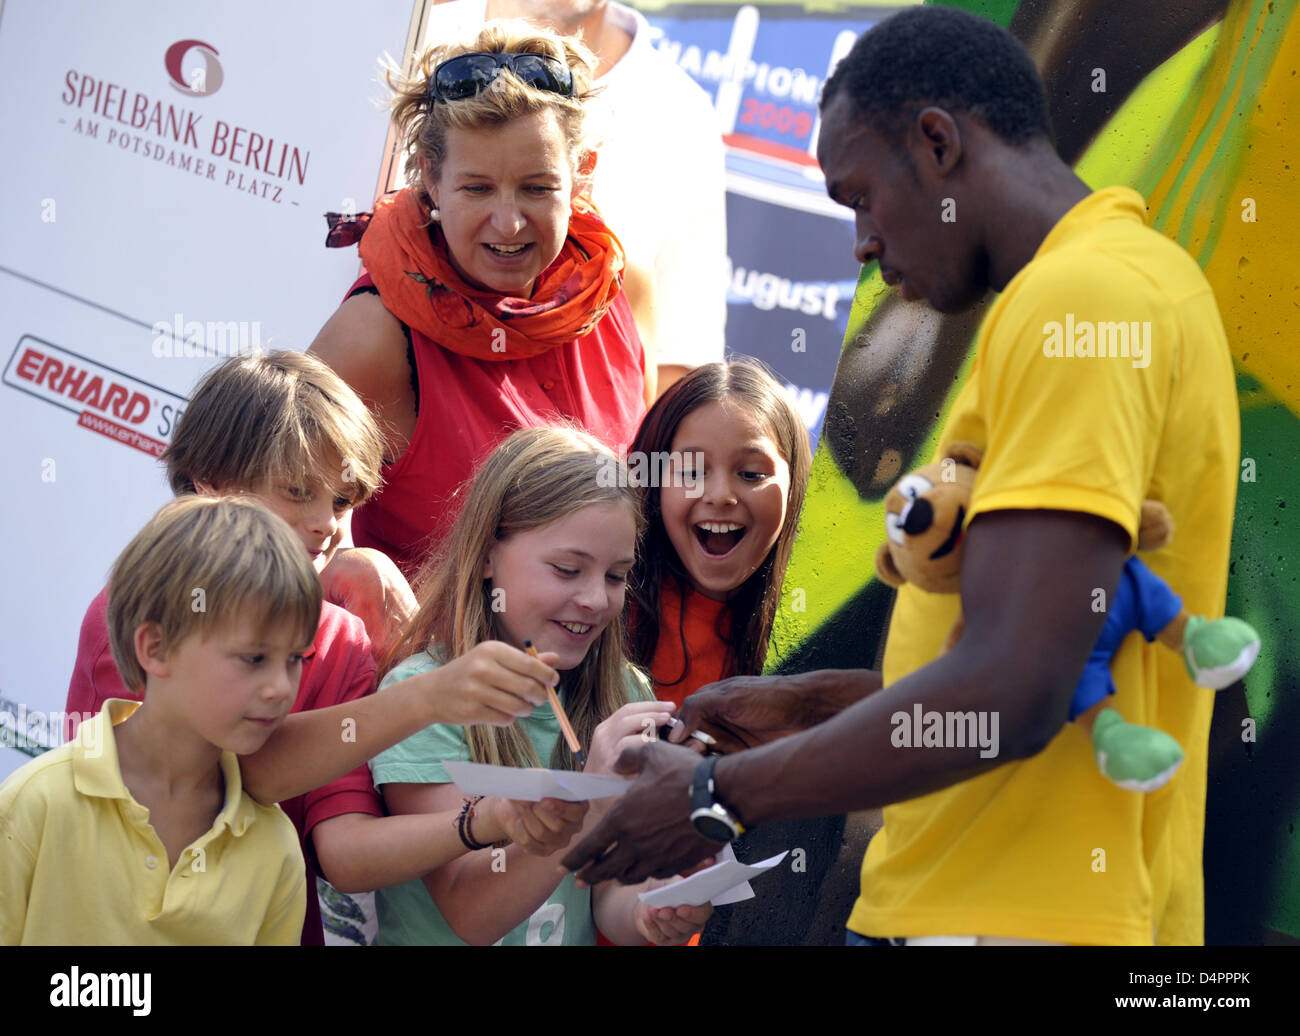 Jamaica?s sprinter Usain Bolt (R) signs autographs at the Champions Club during the 12th IAAF World Championships in Athletics Berlin 2009 in Berlin, Germany, 23 August 2009.  Photo: Hannibal Stock Photo